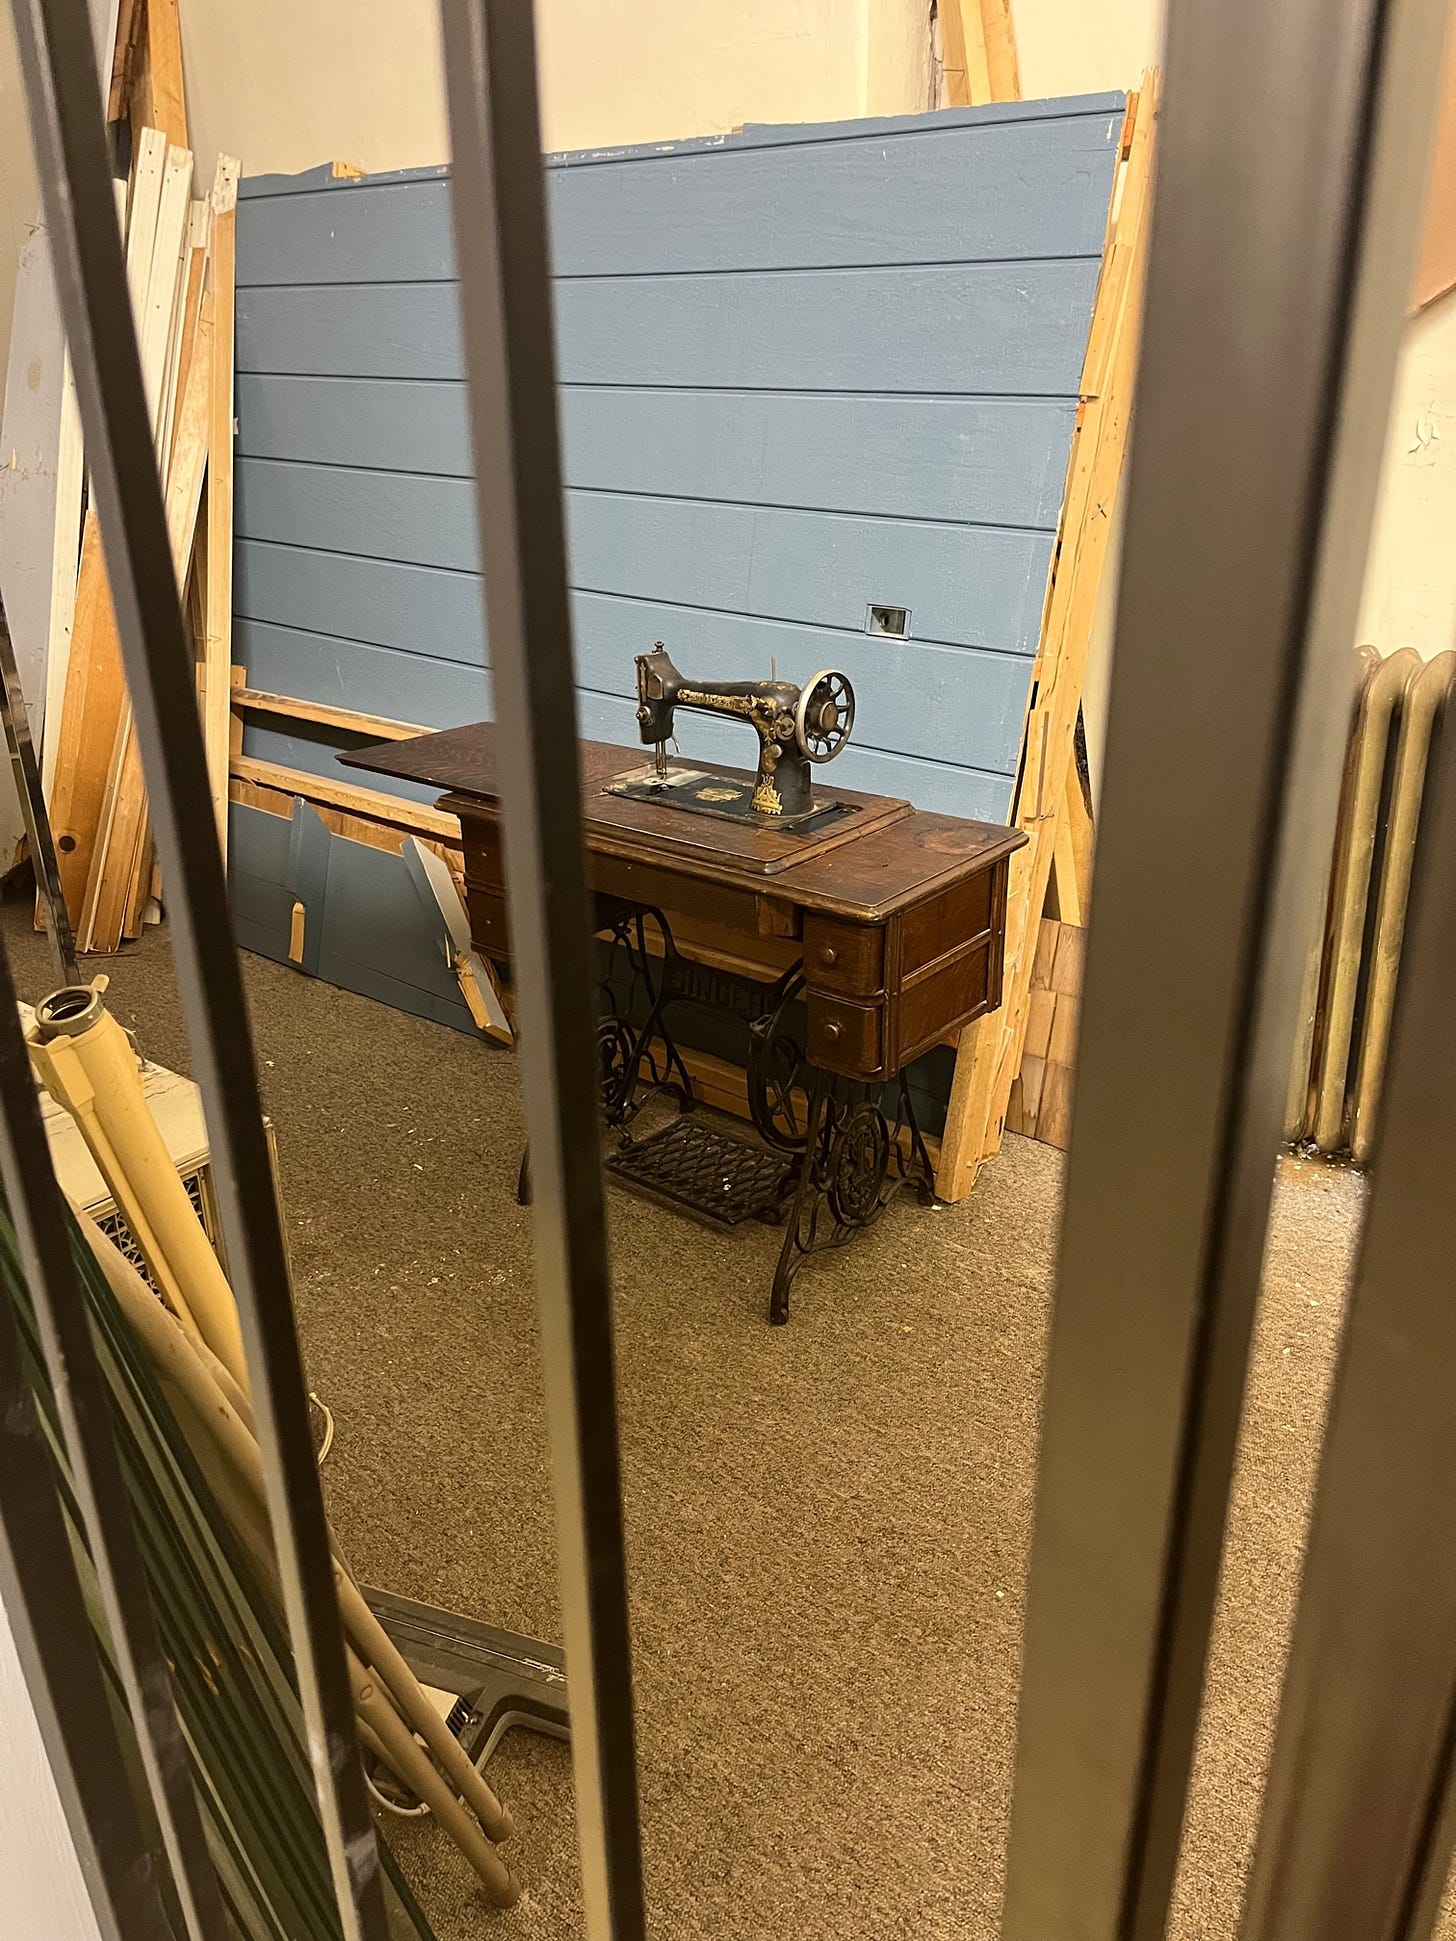 An antique sewing machine and table in an unfinished room behind an iron door